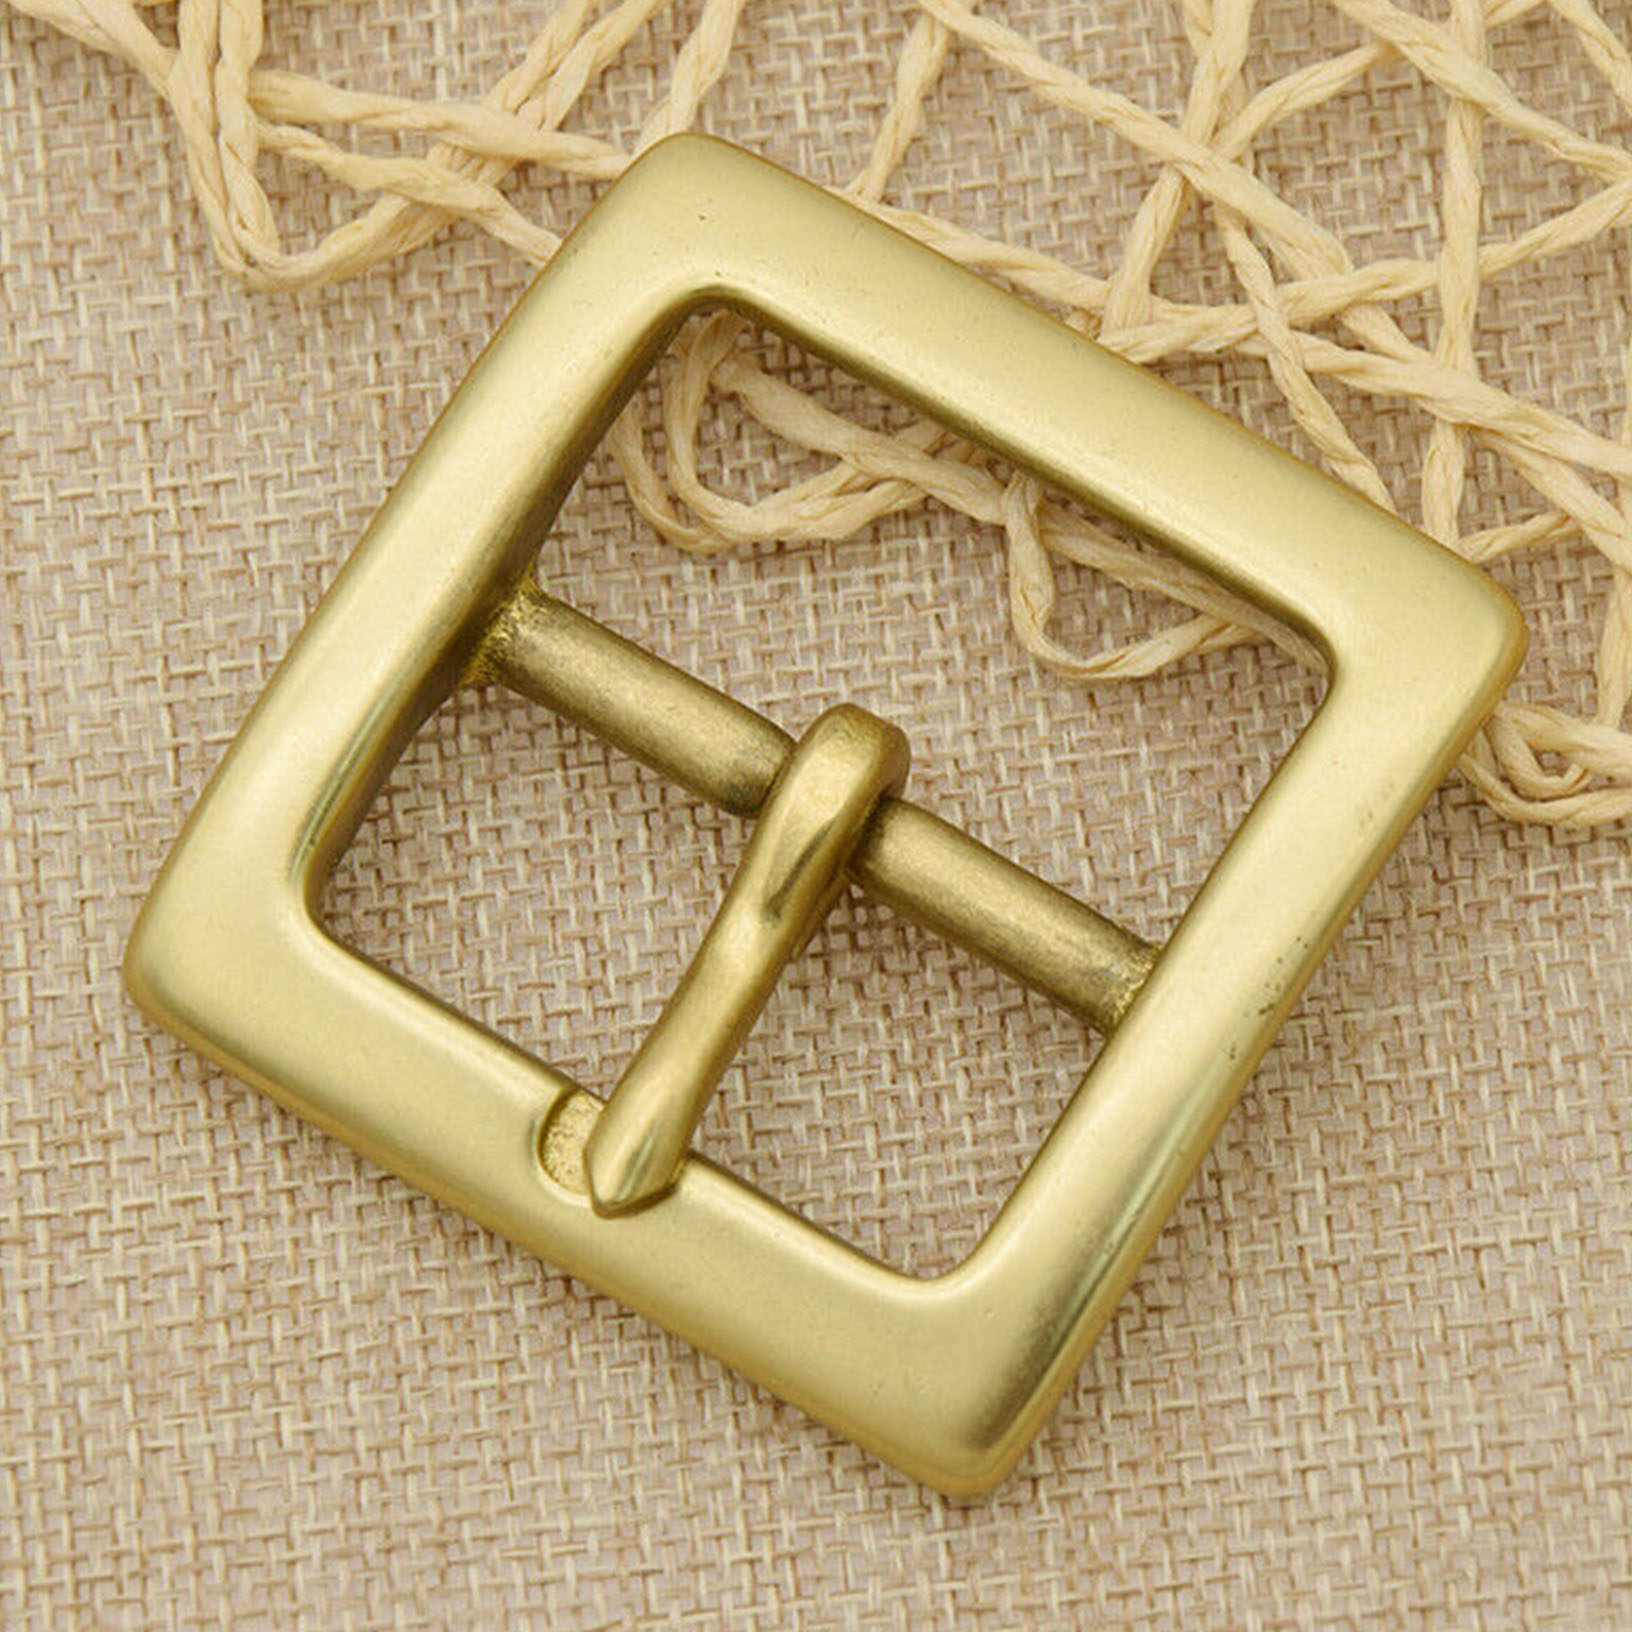 1x Polished Solid Brass Belt Buckle For 1.5inch Wide Belt Replacement